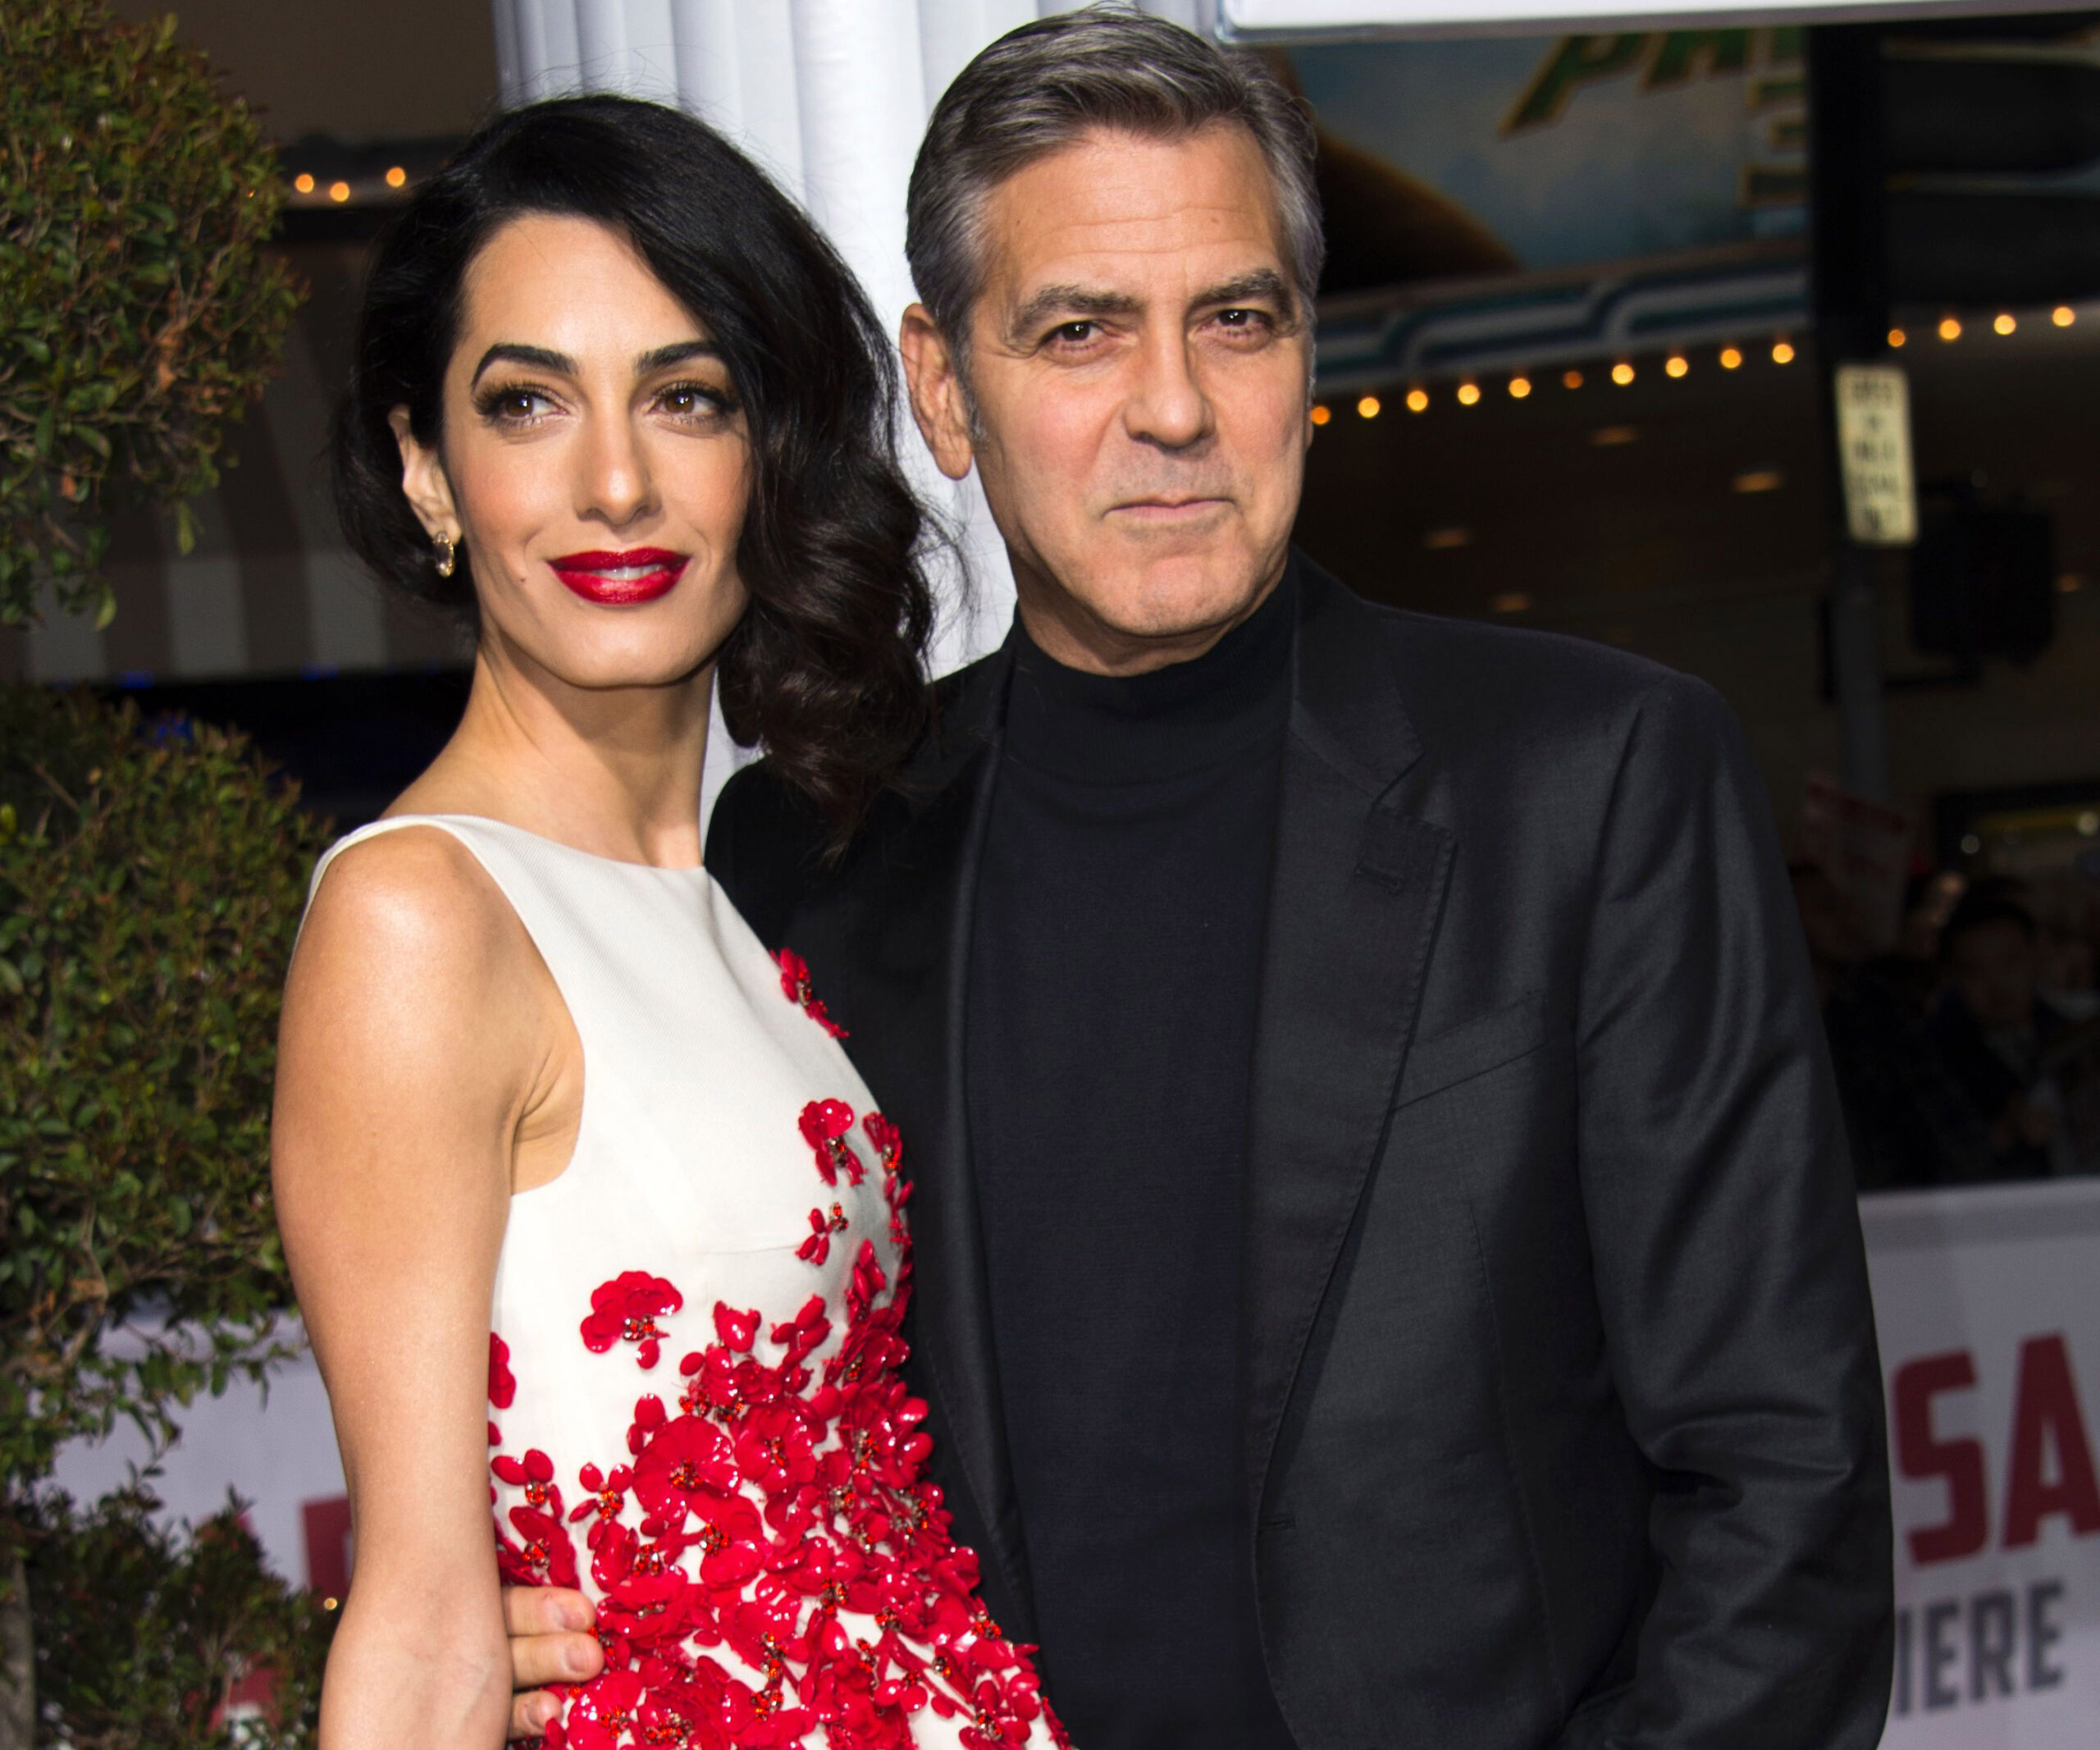 George Clooney reveals the secret to his happy marriage